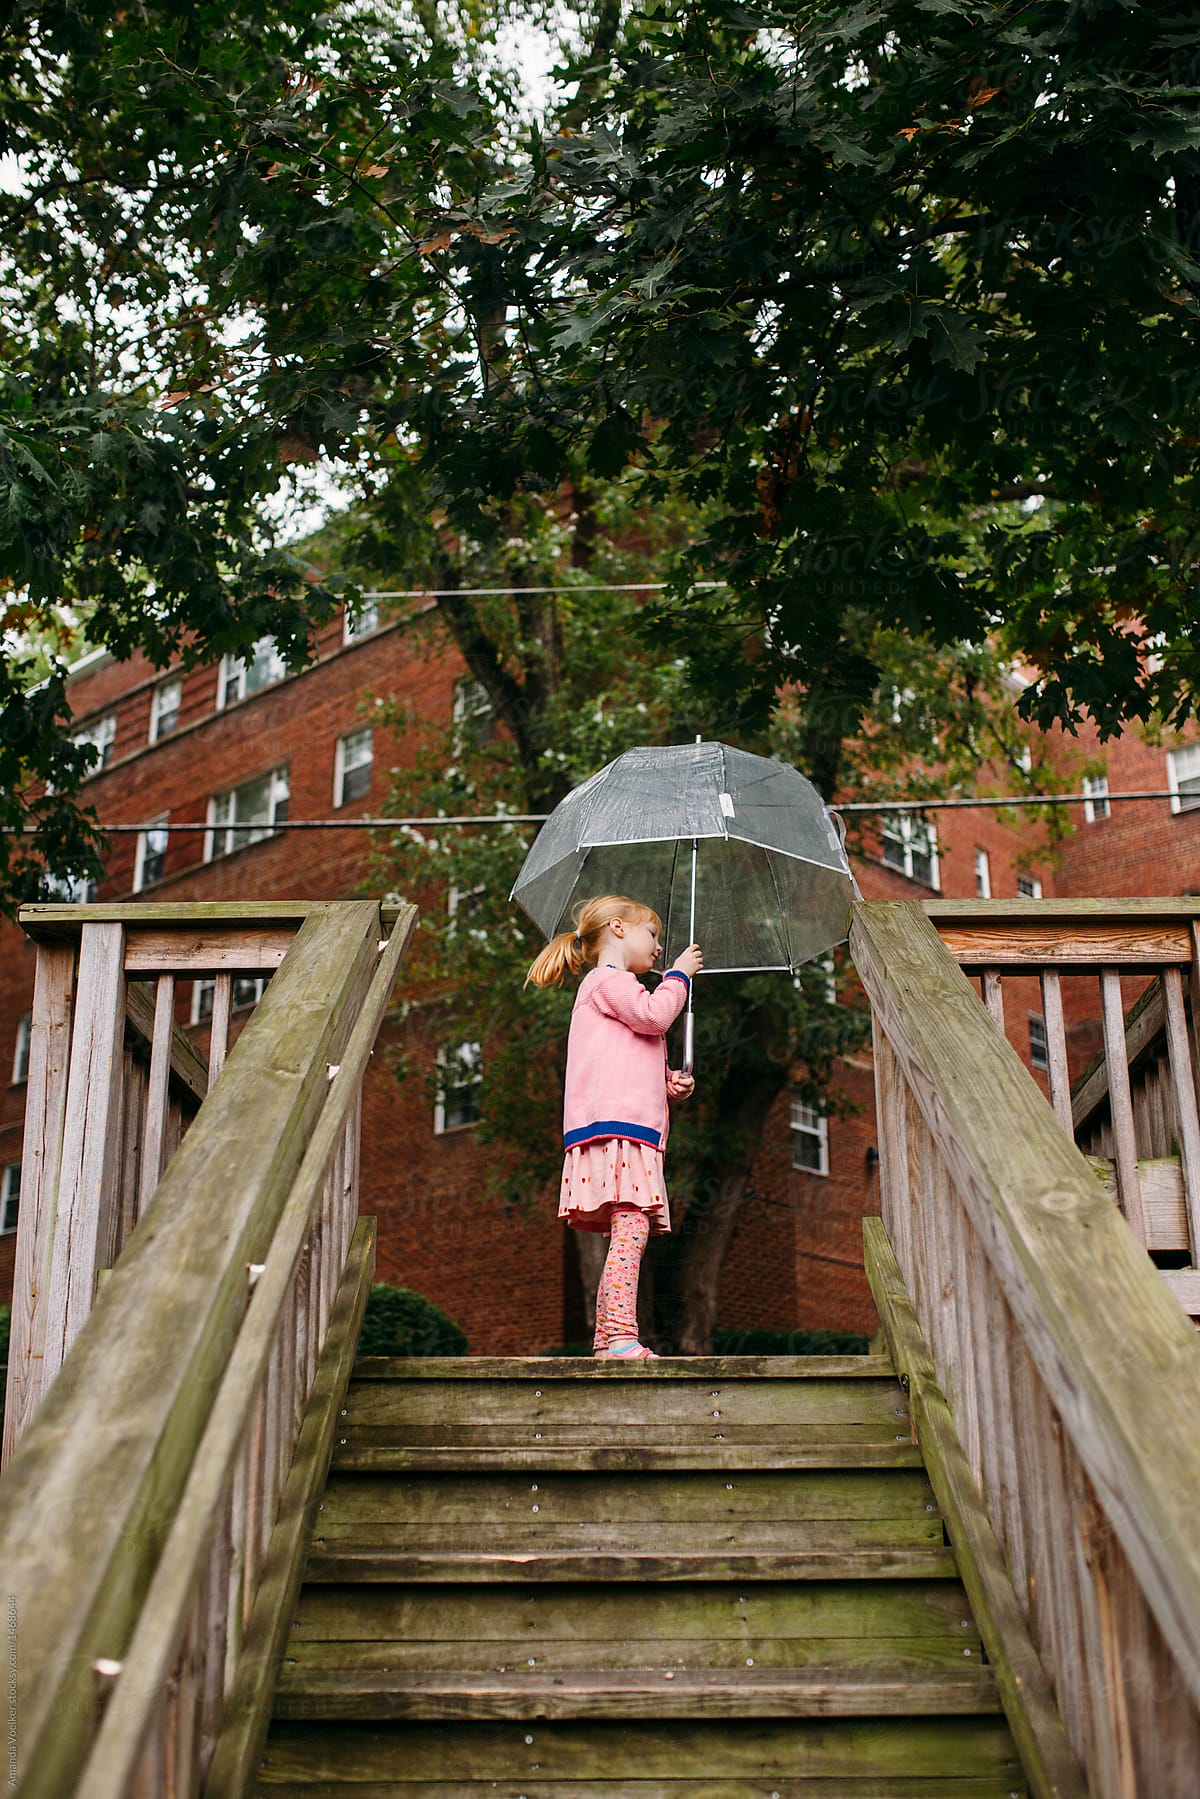 Girl With Umbrella on Stairs